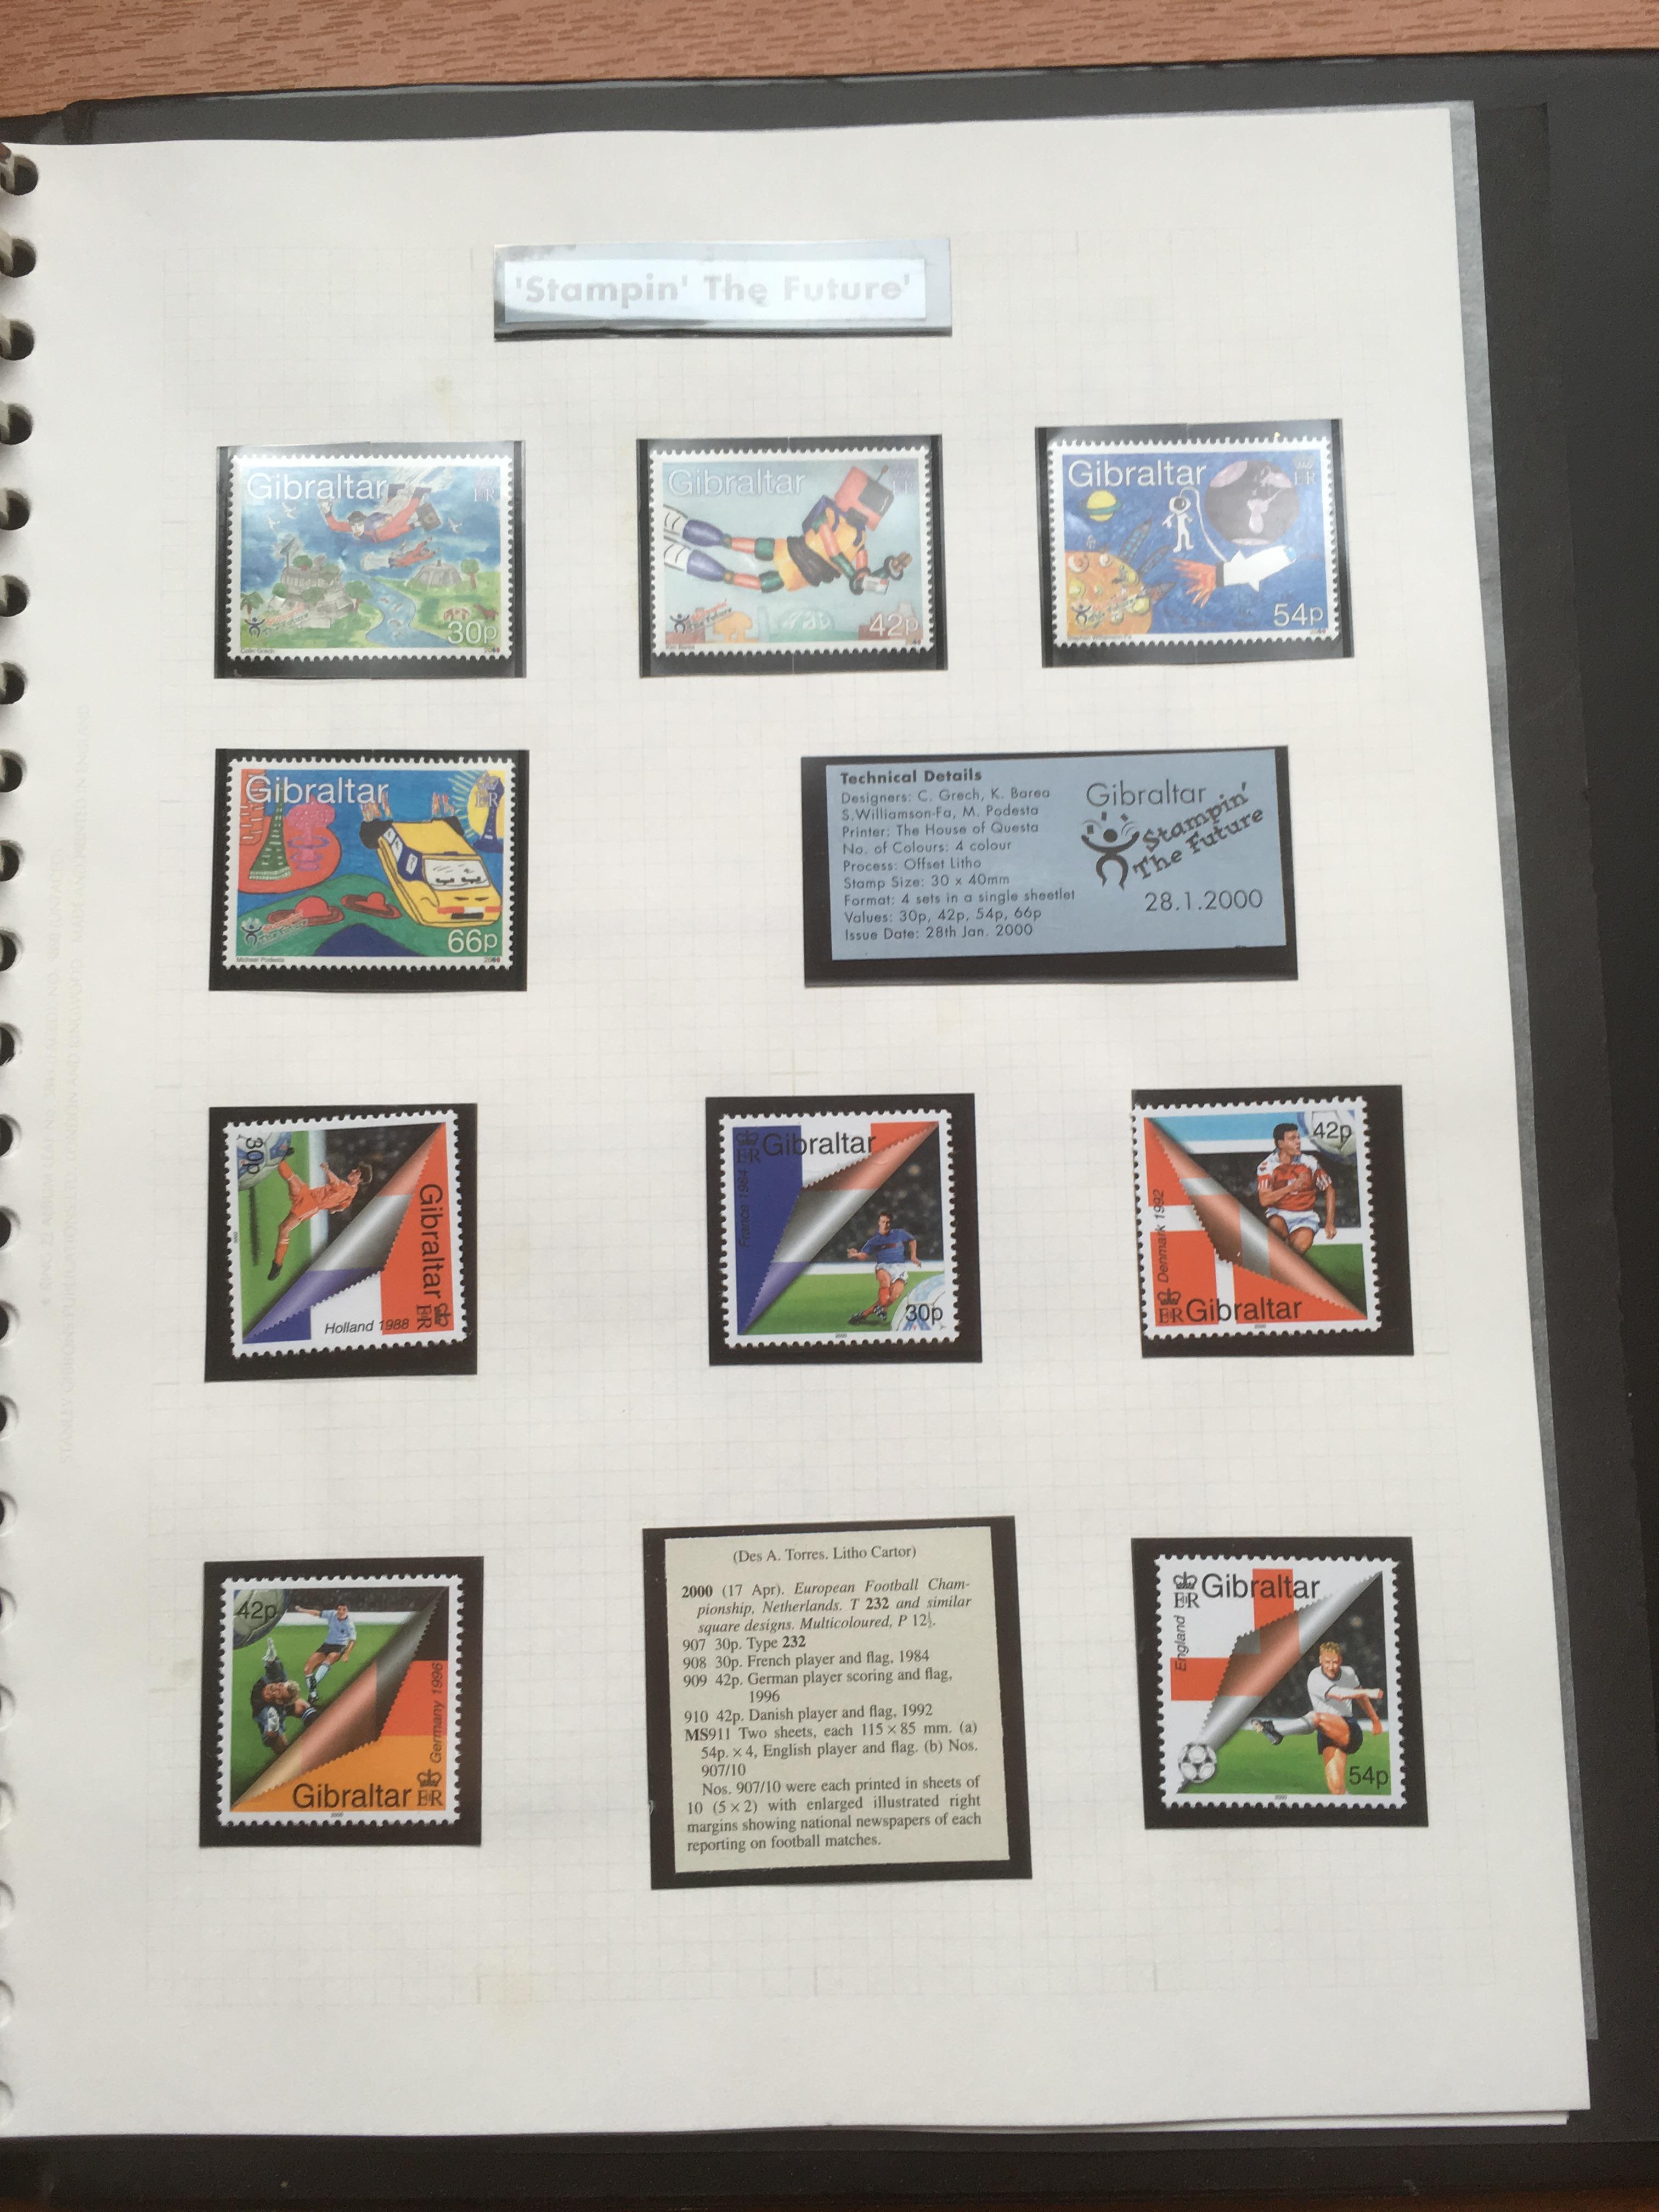 BOX WITH COMMONWEALTH STAMPS IN SIX STOCKBOOKS, ALSO ALBUM WITH GIBRALTAR 1996-2000 MNH COLLECTION. - Image 3 of 8